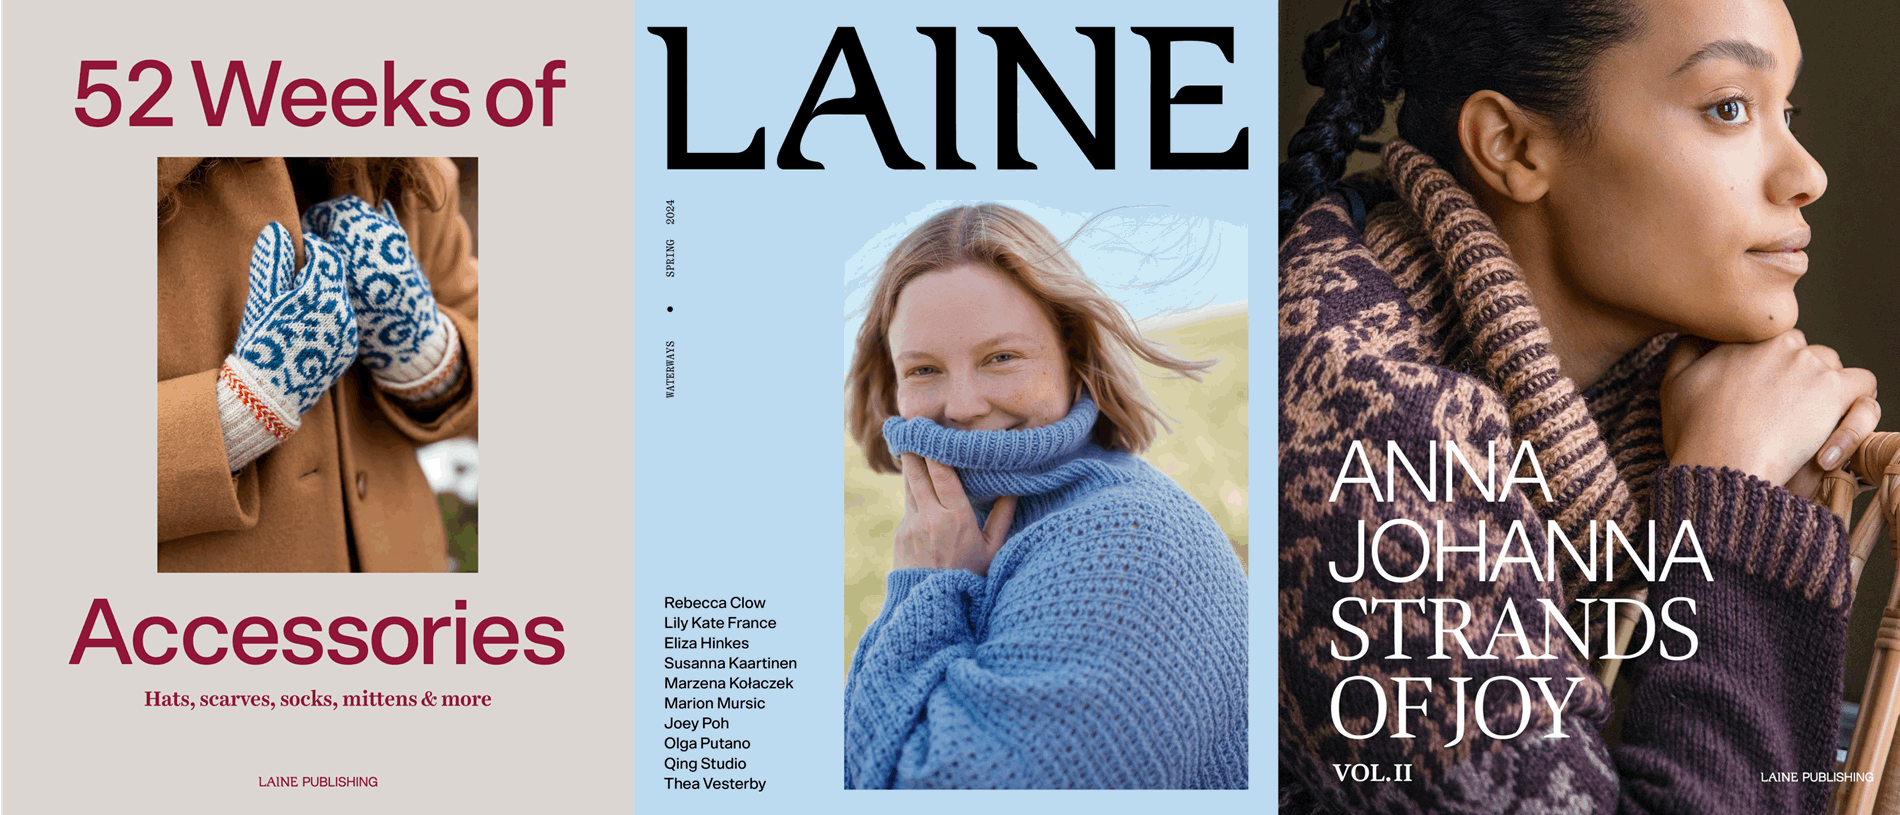 52 Weeks of accessories, Laine Magazine No. 20, Strands of Joy Vol. II.png